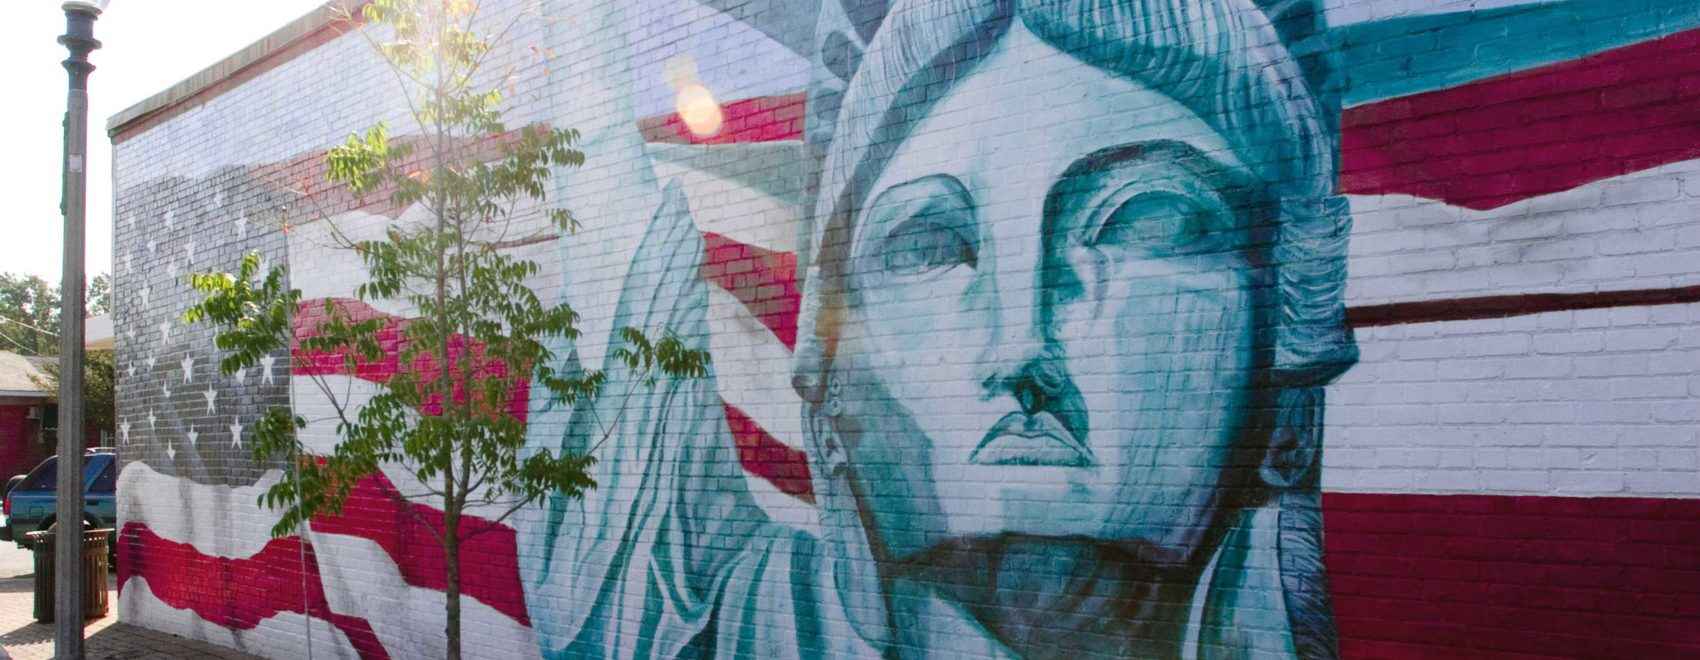 Bay Minette mural of statue of Liberty